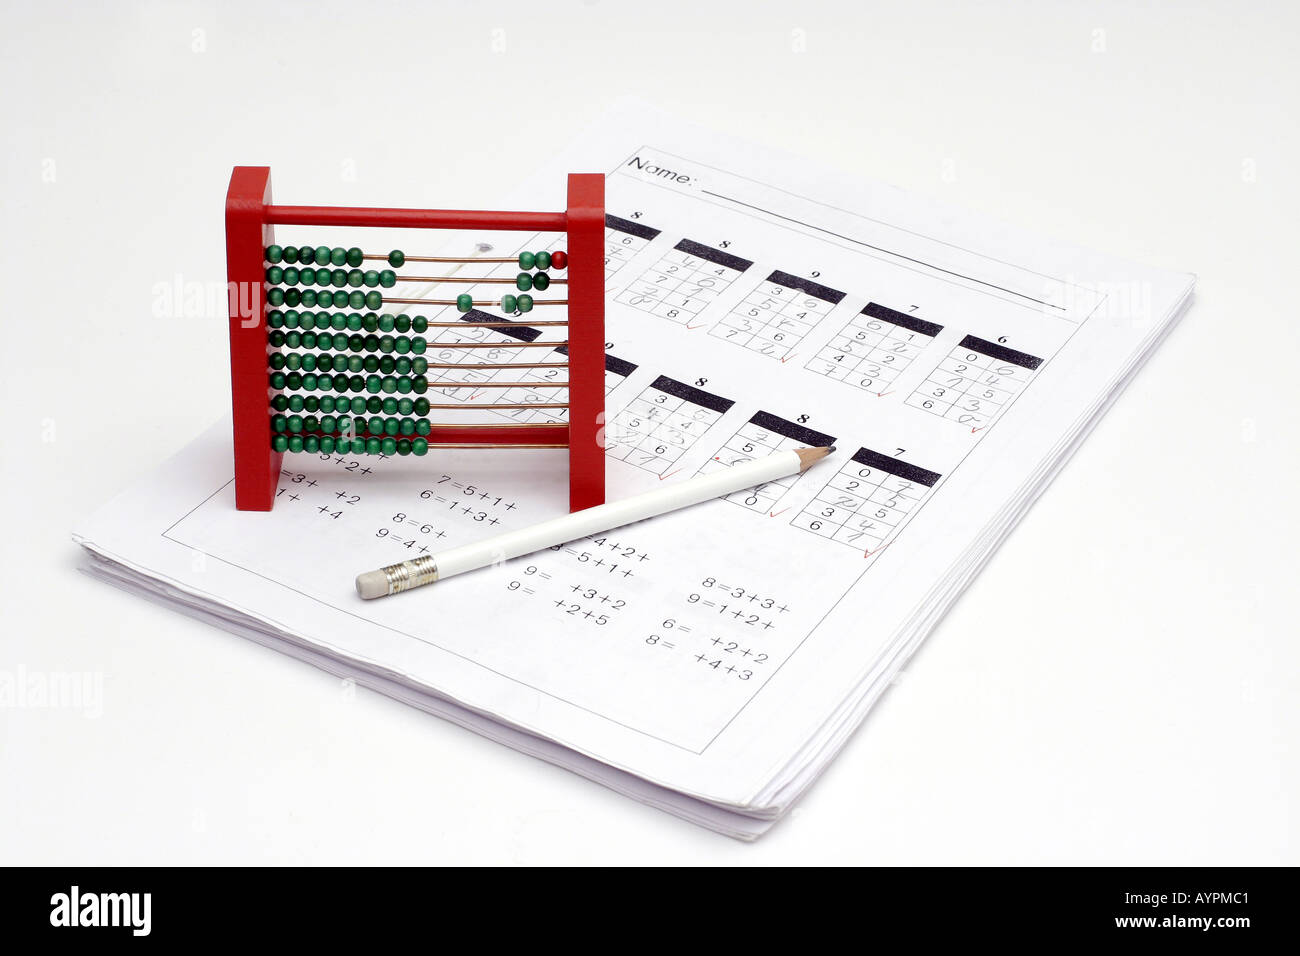 An abacus and a pencil is placed on the papers with mathematical equations written on it Stock Photo